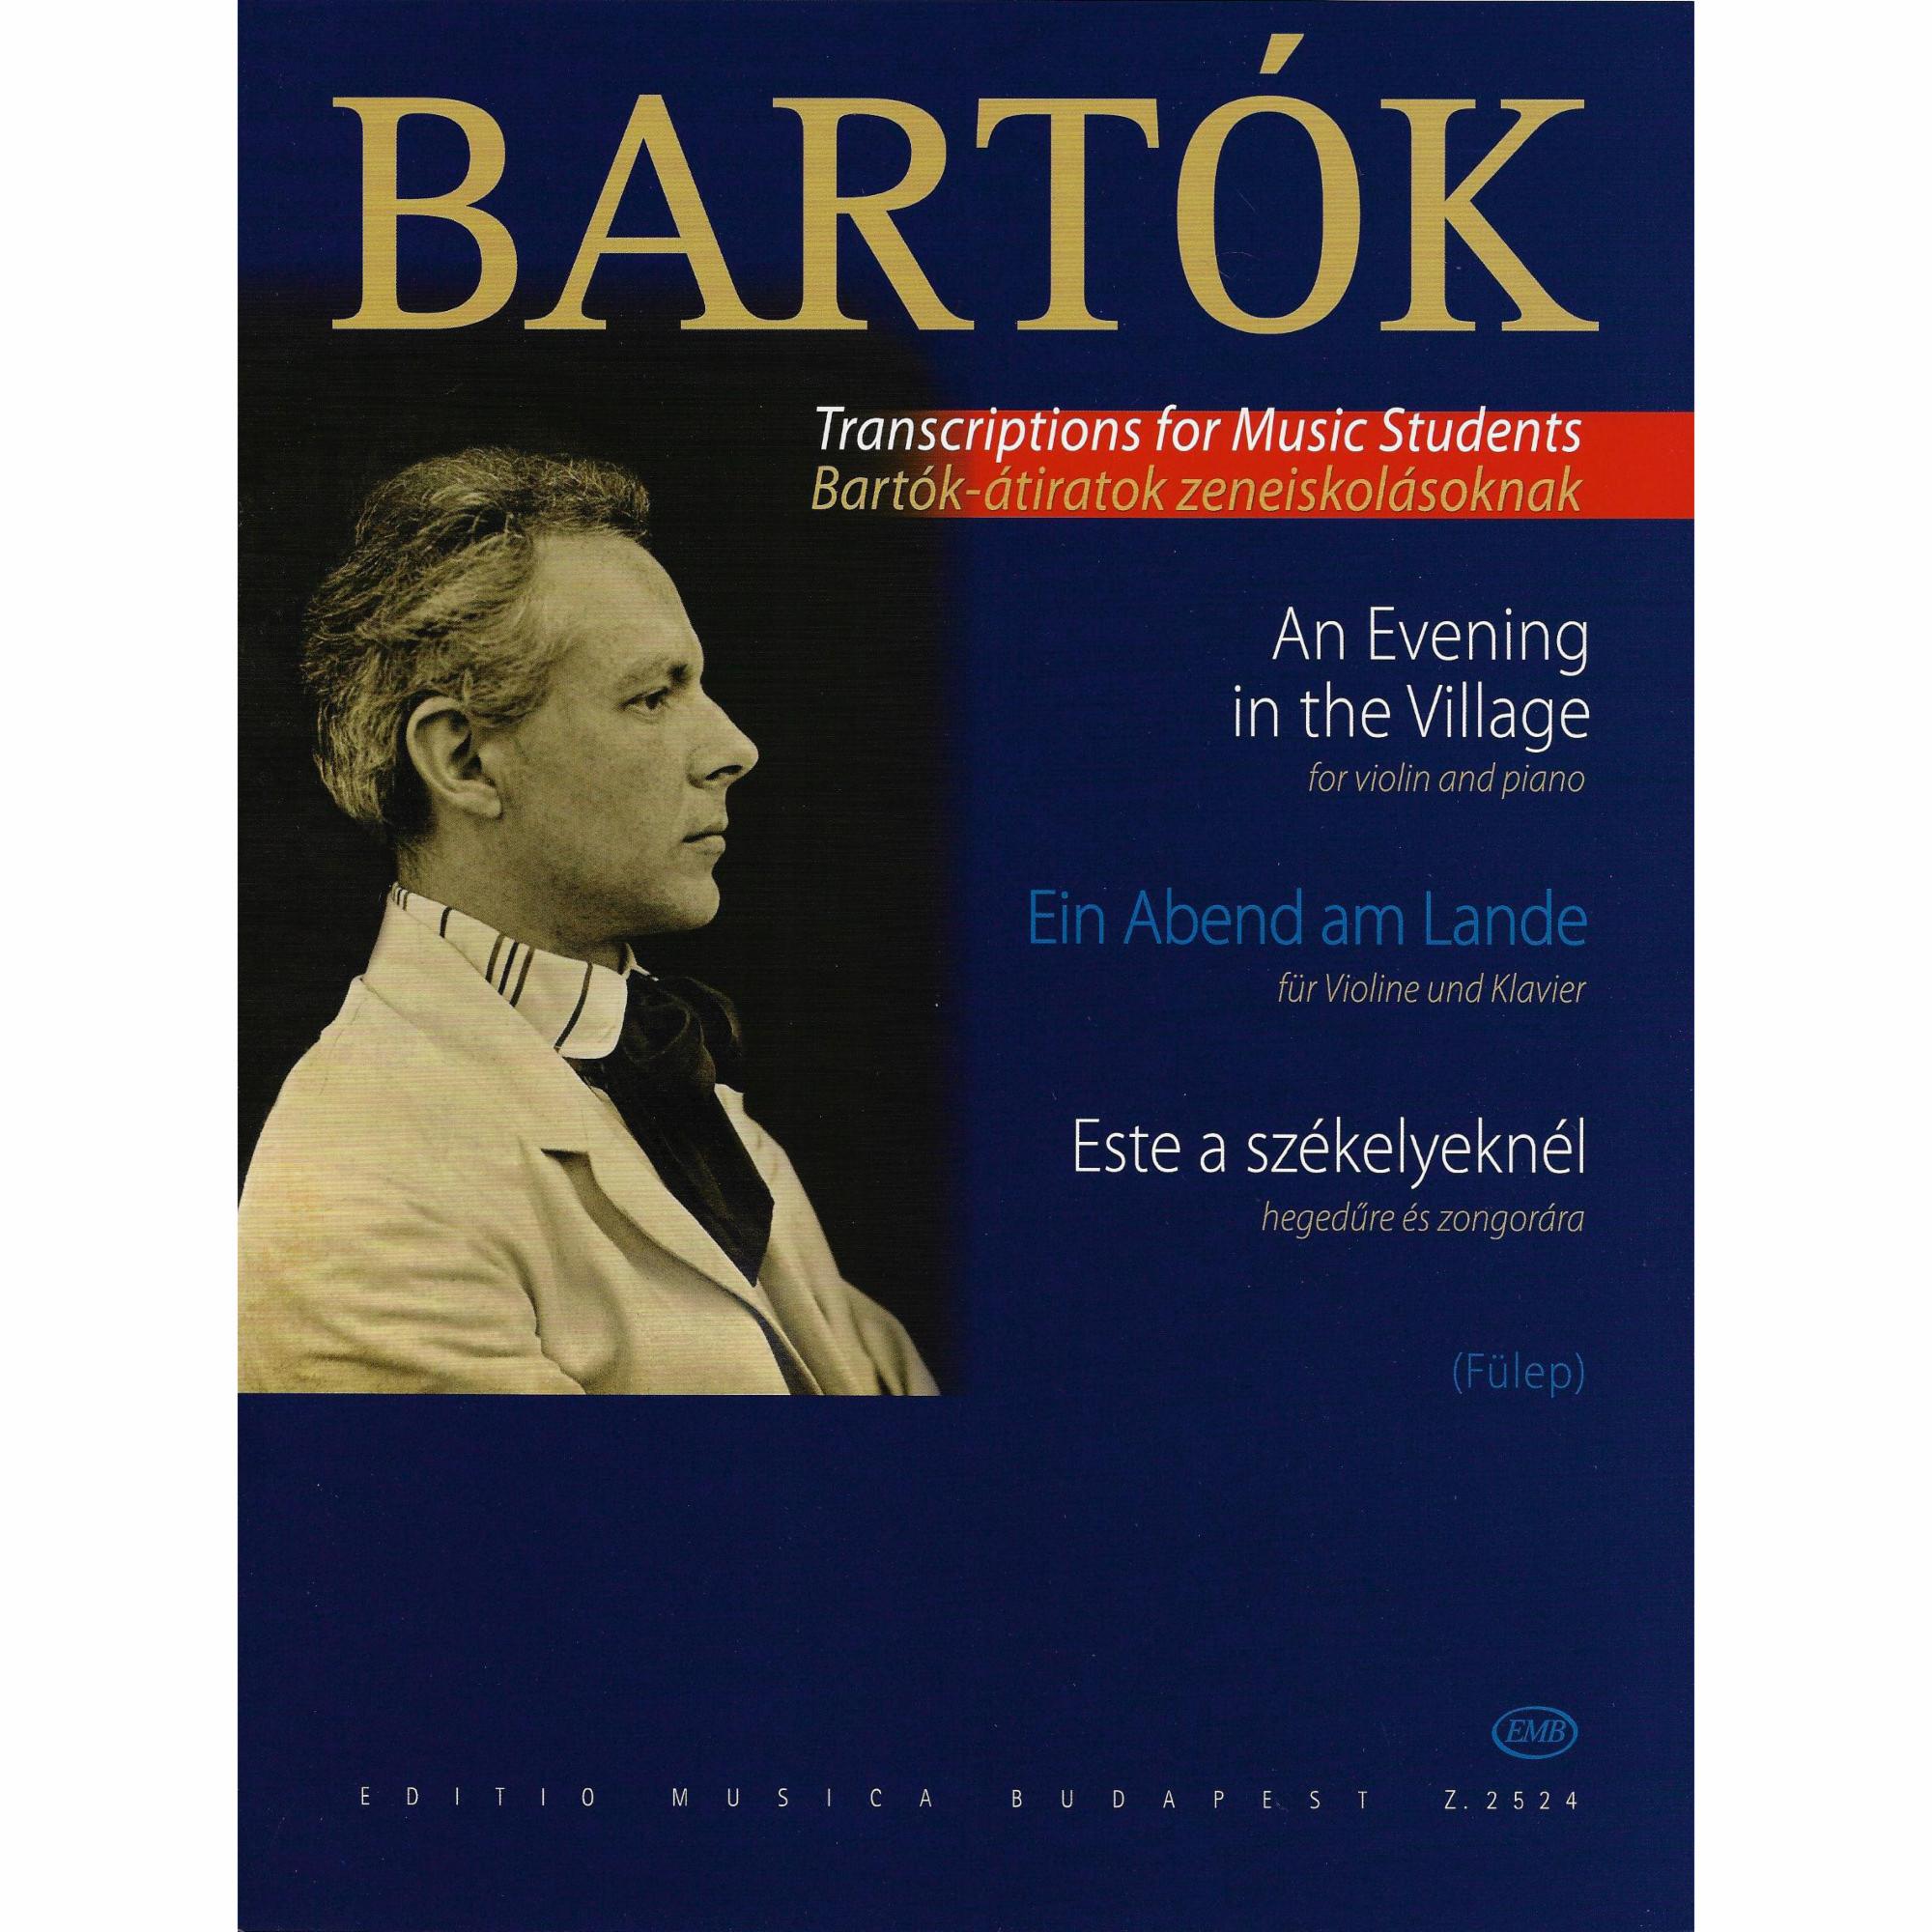 Bartok -- An Evening in the Village for Violin and Piano